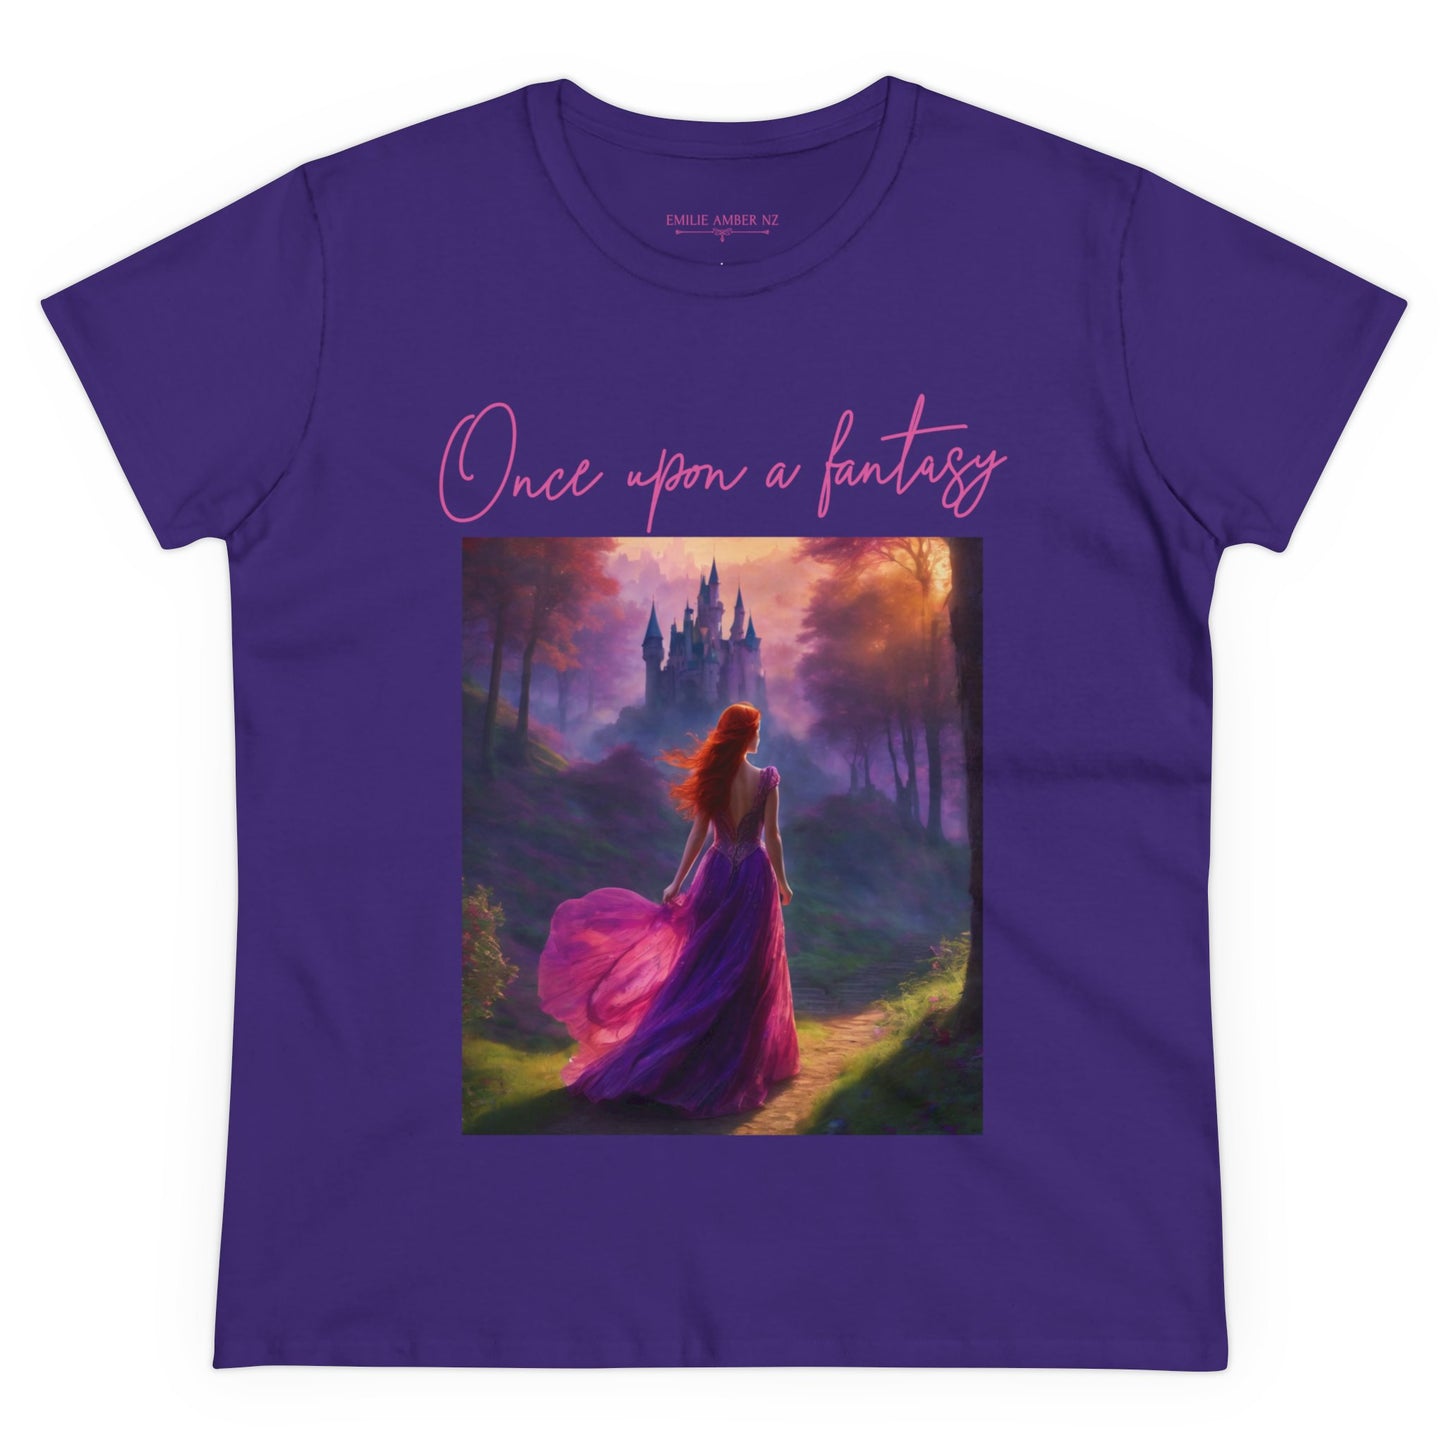 Once Upon A Fantasy Woman's Cotton T-Shirt